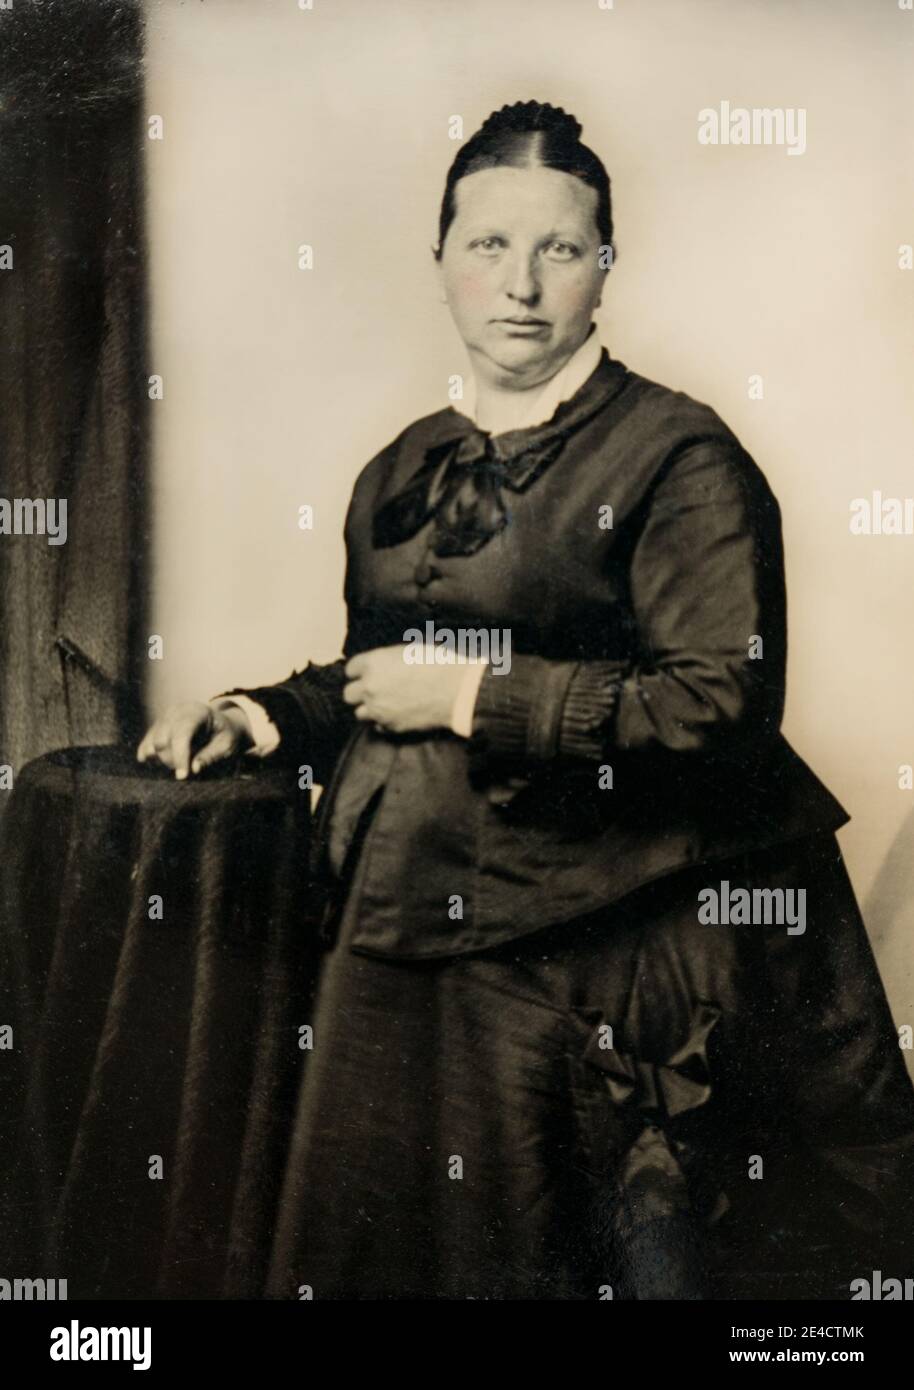 American archive monochrome portrait  on tintype plate of a woman in a a black dress with eretouched hand painted pink tint. Taken late 19th century, NY, USA Stock Photo